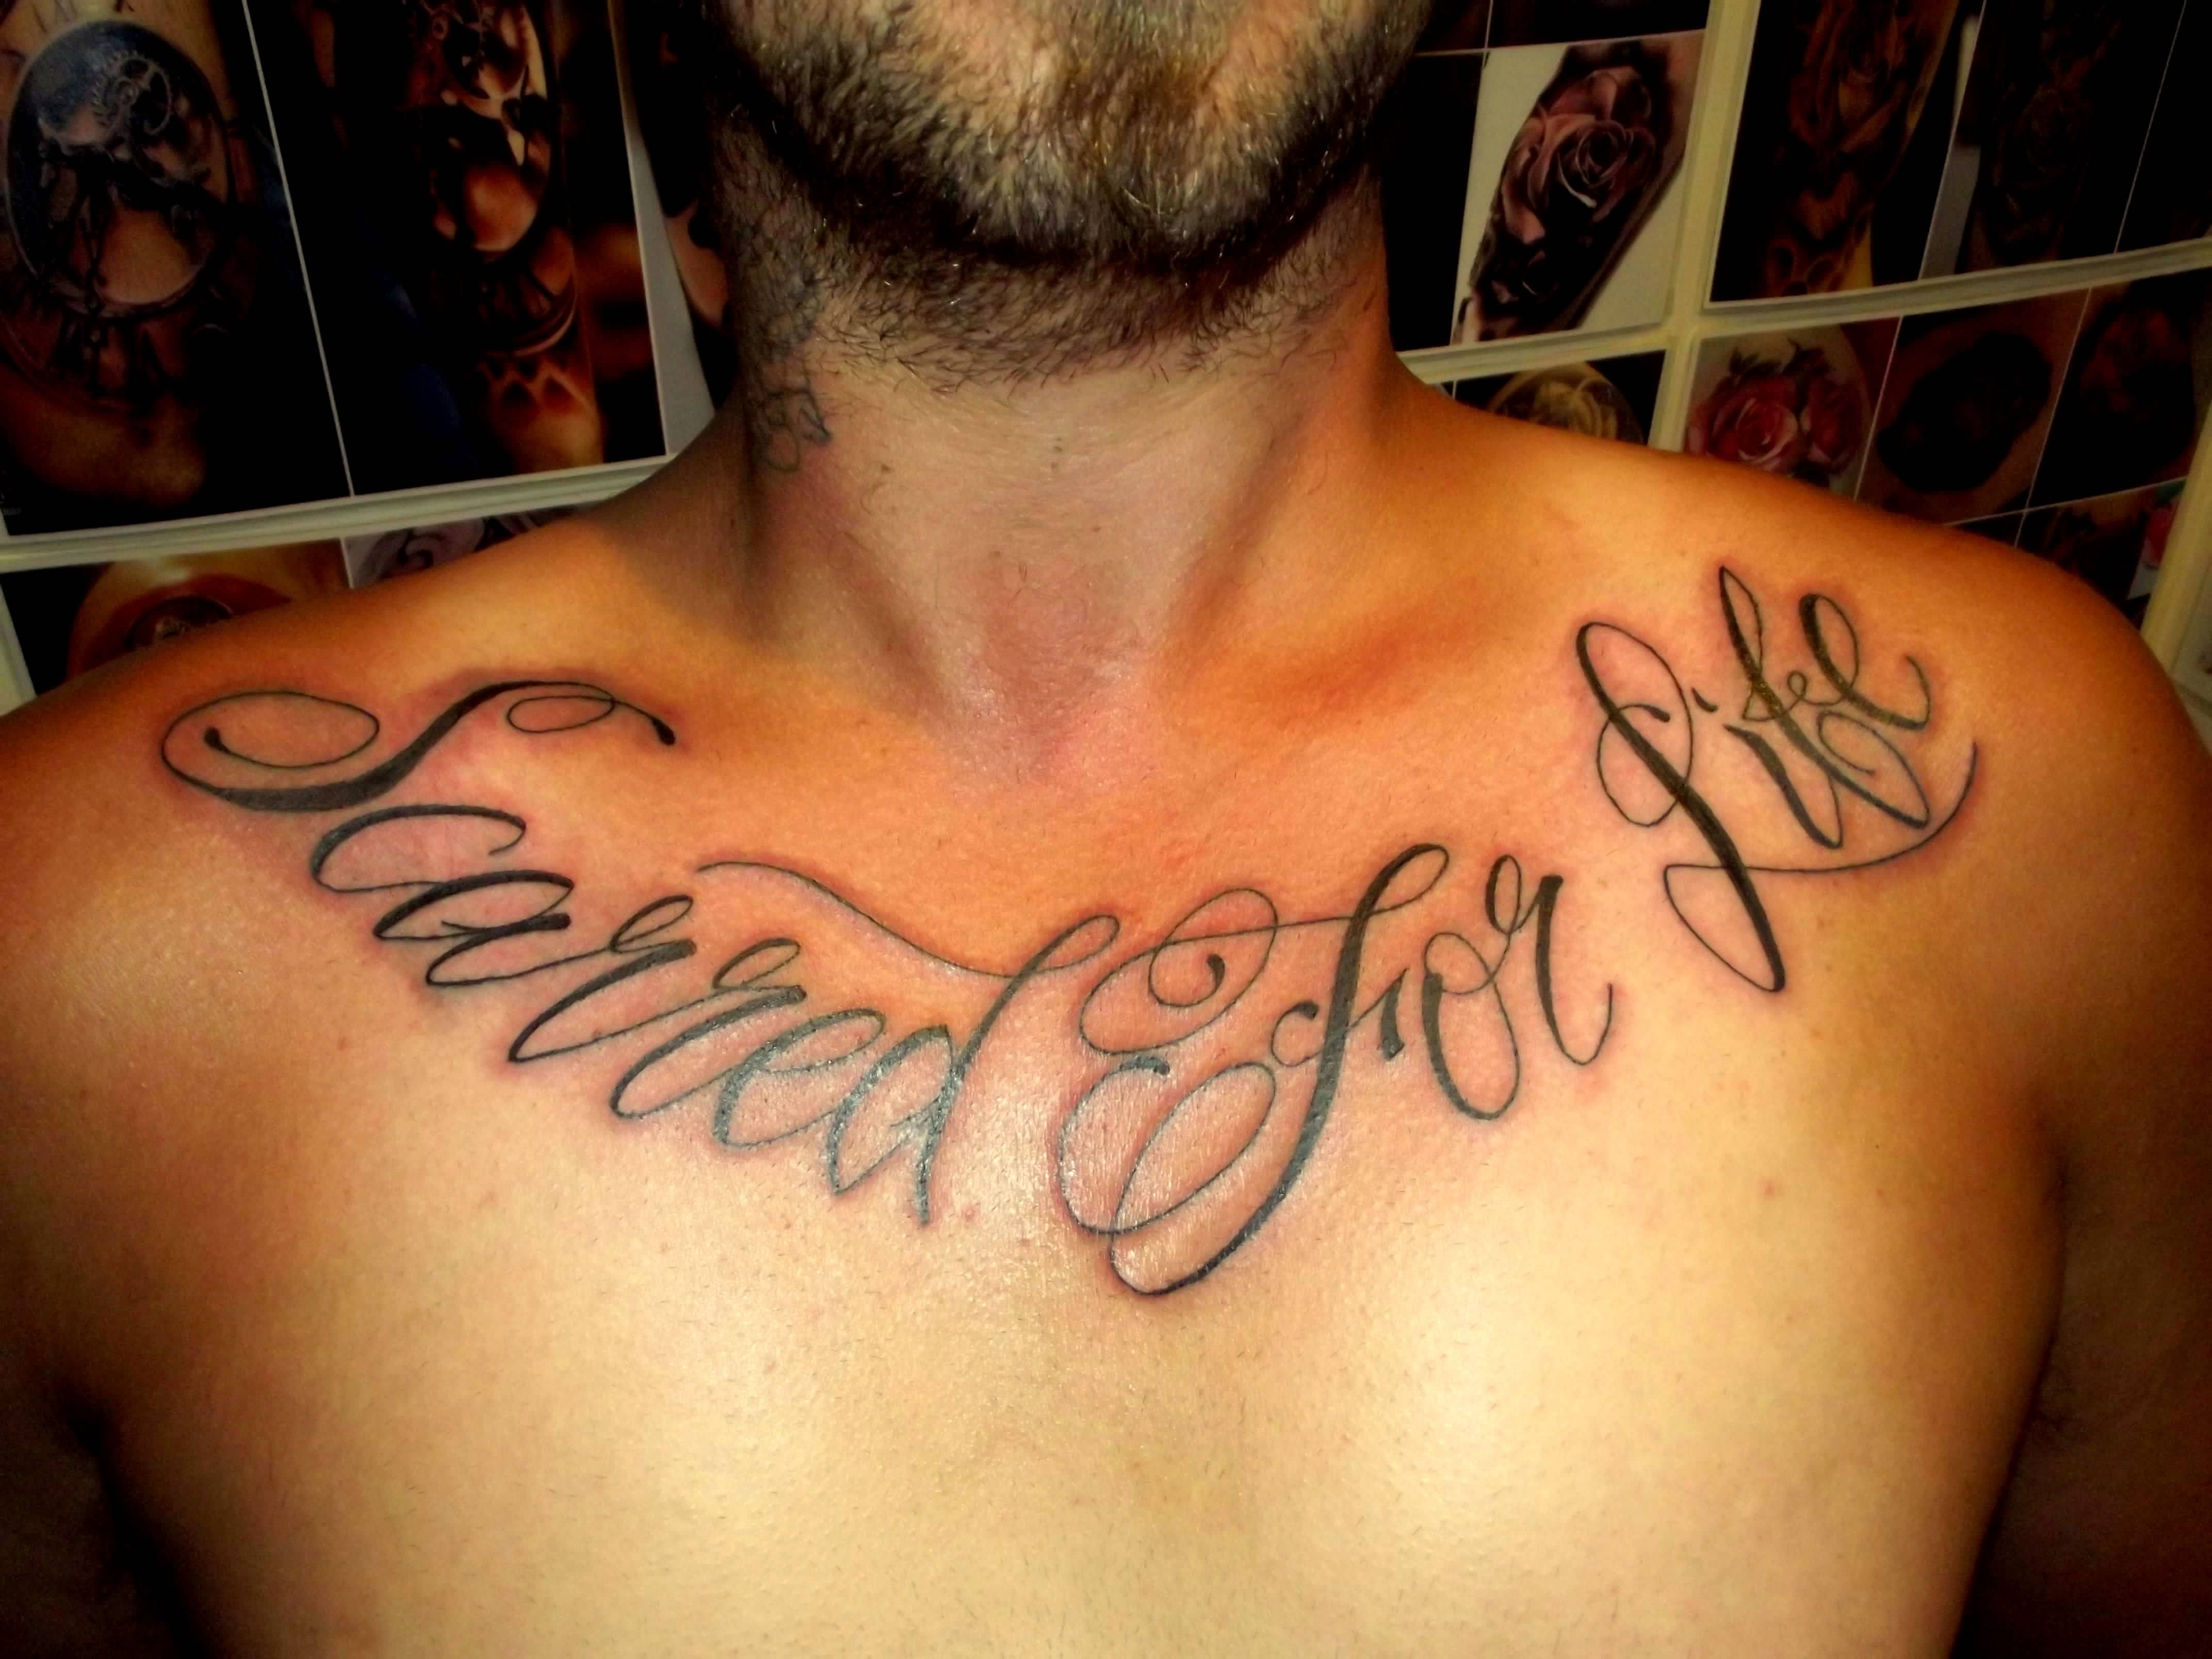 5. "Script Writing Chest Tattoos" - wide 3